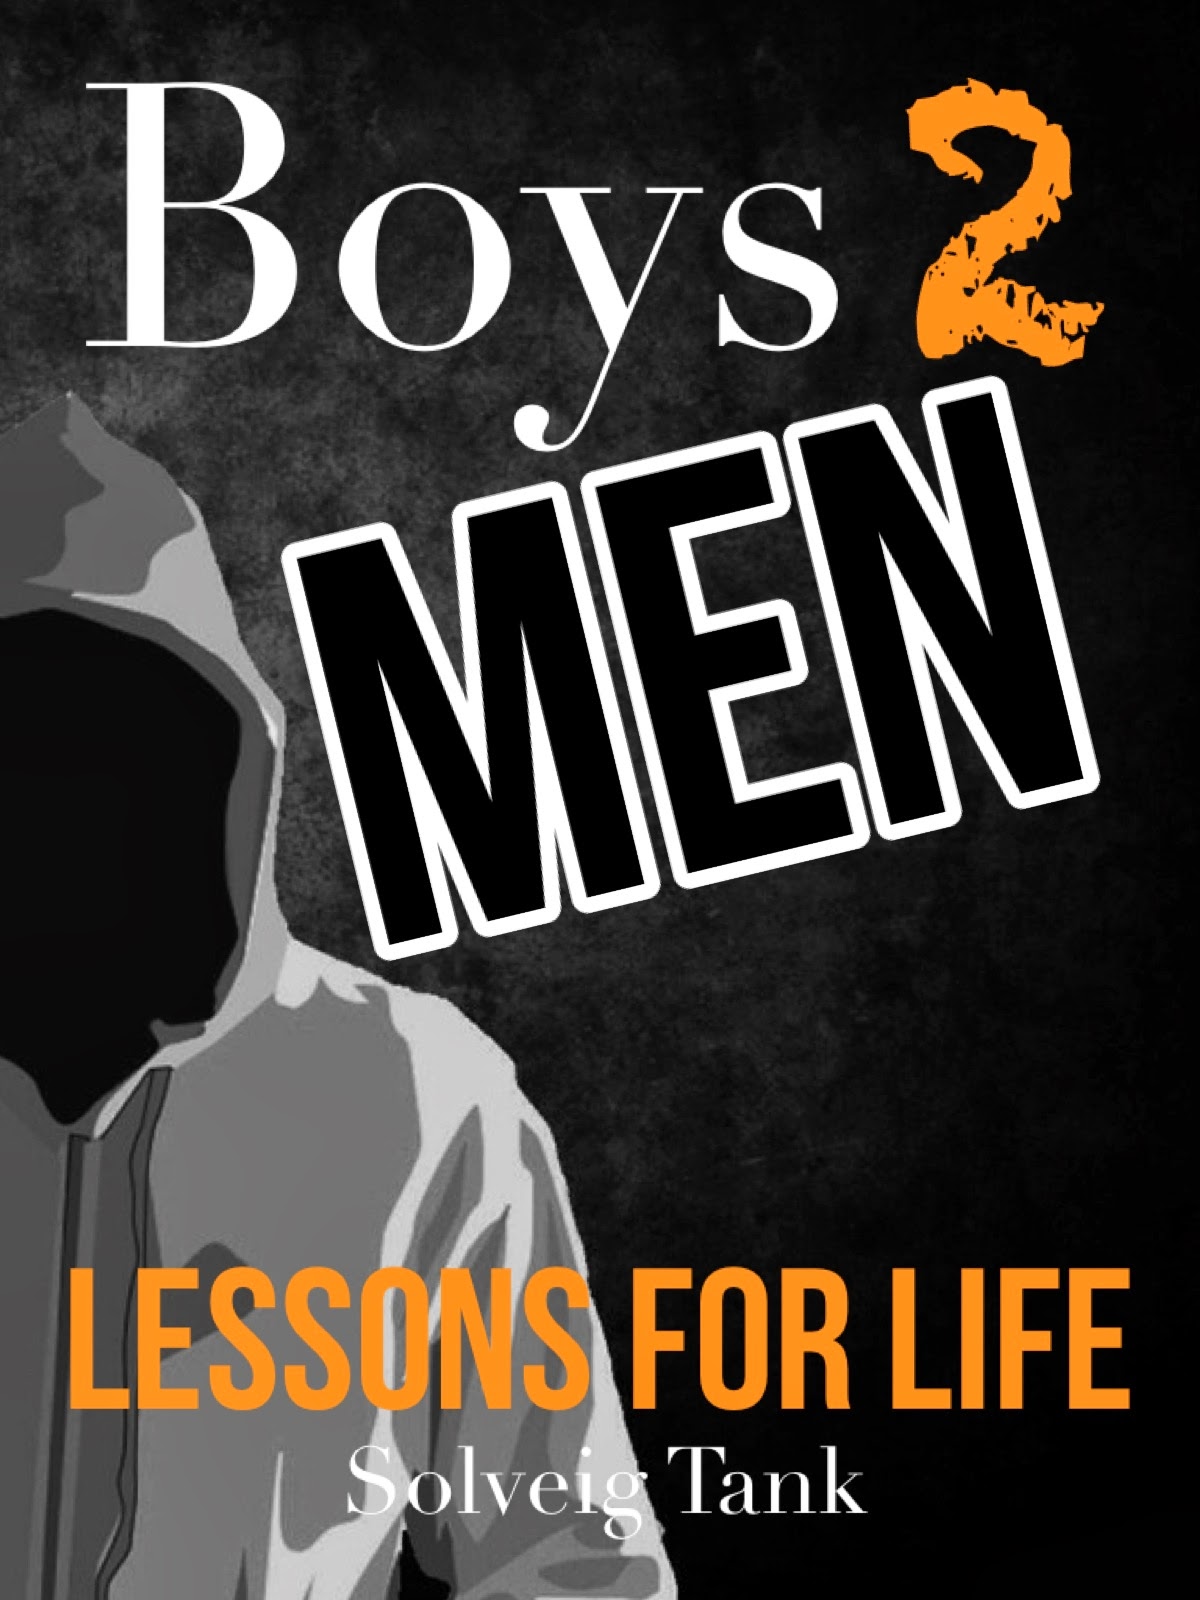 Boys to Men- Lessons for Life